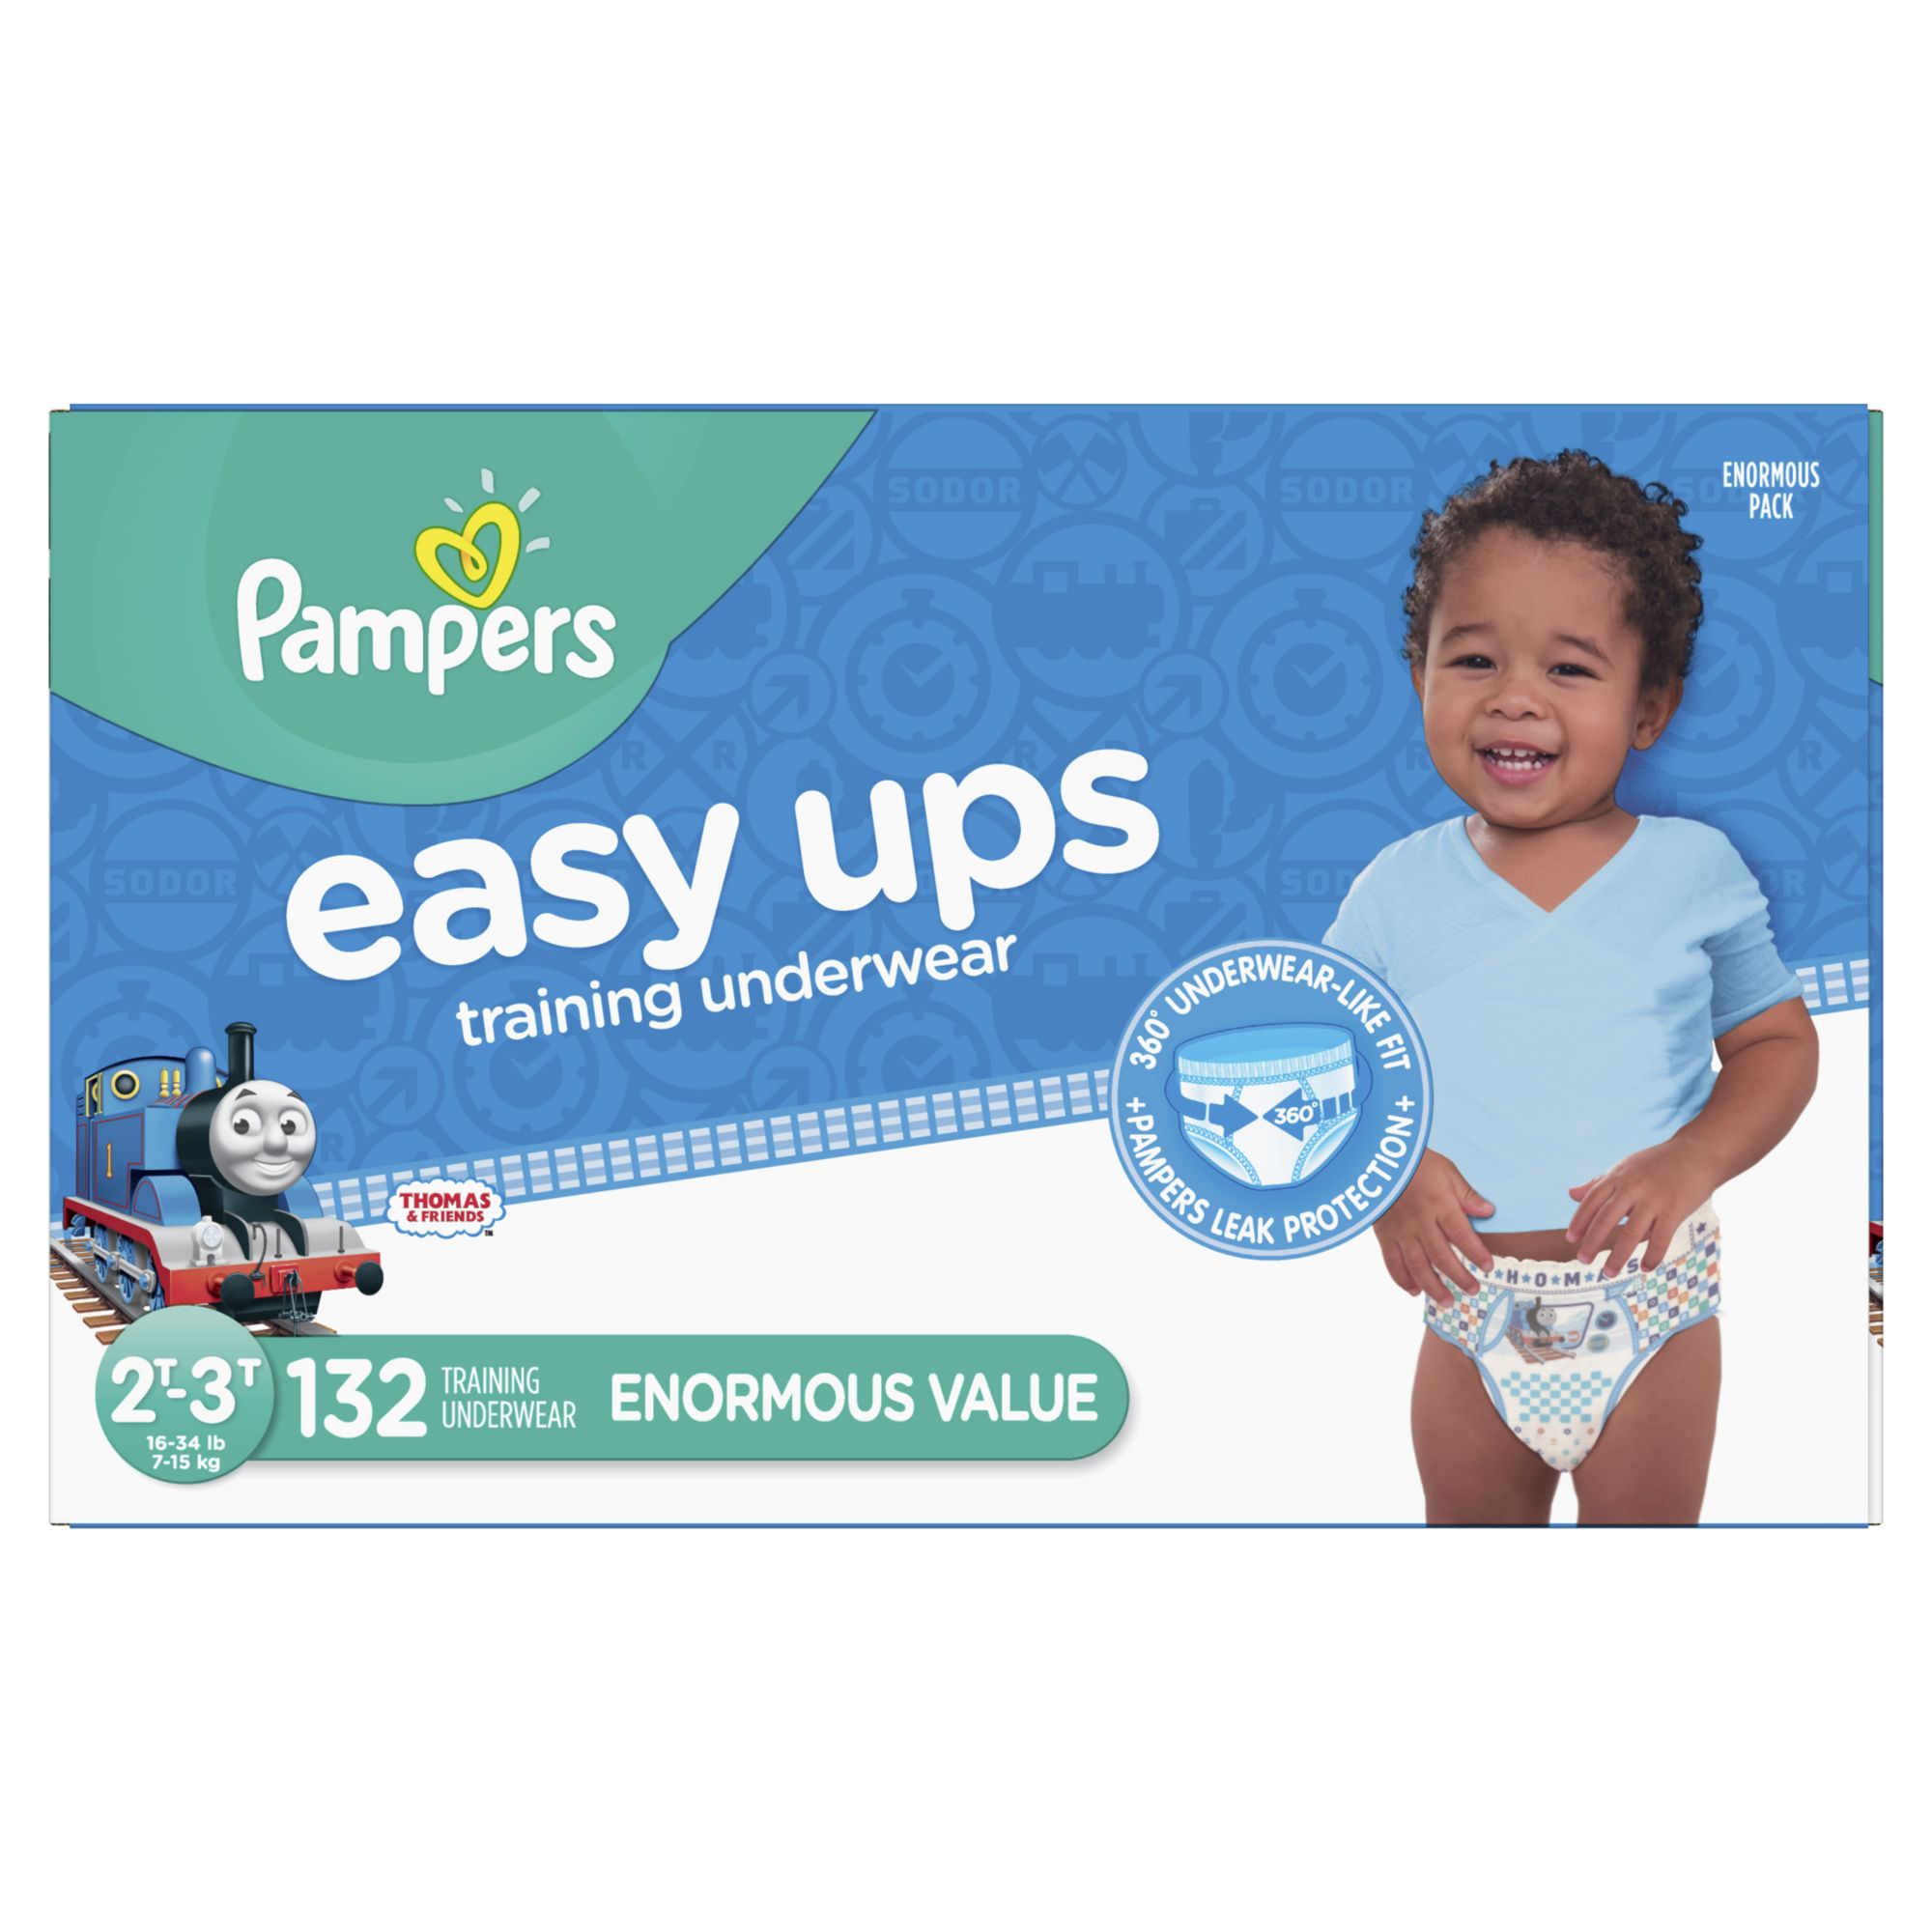 Pampers Easy Ups Training Underwear for Boys, Size 3T-4T